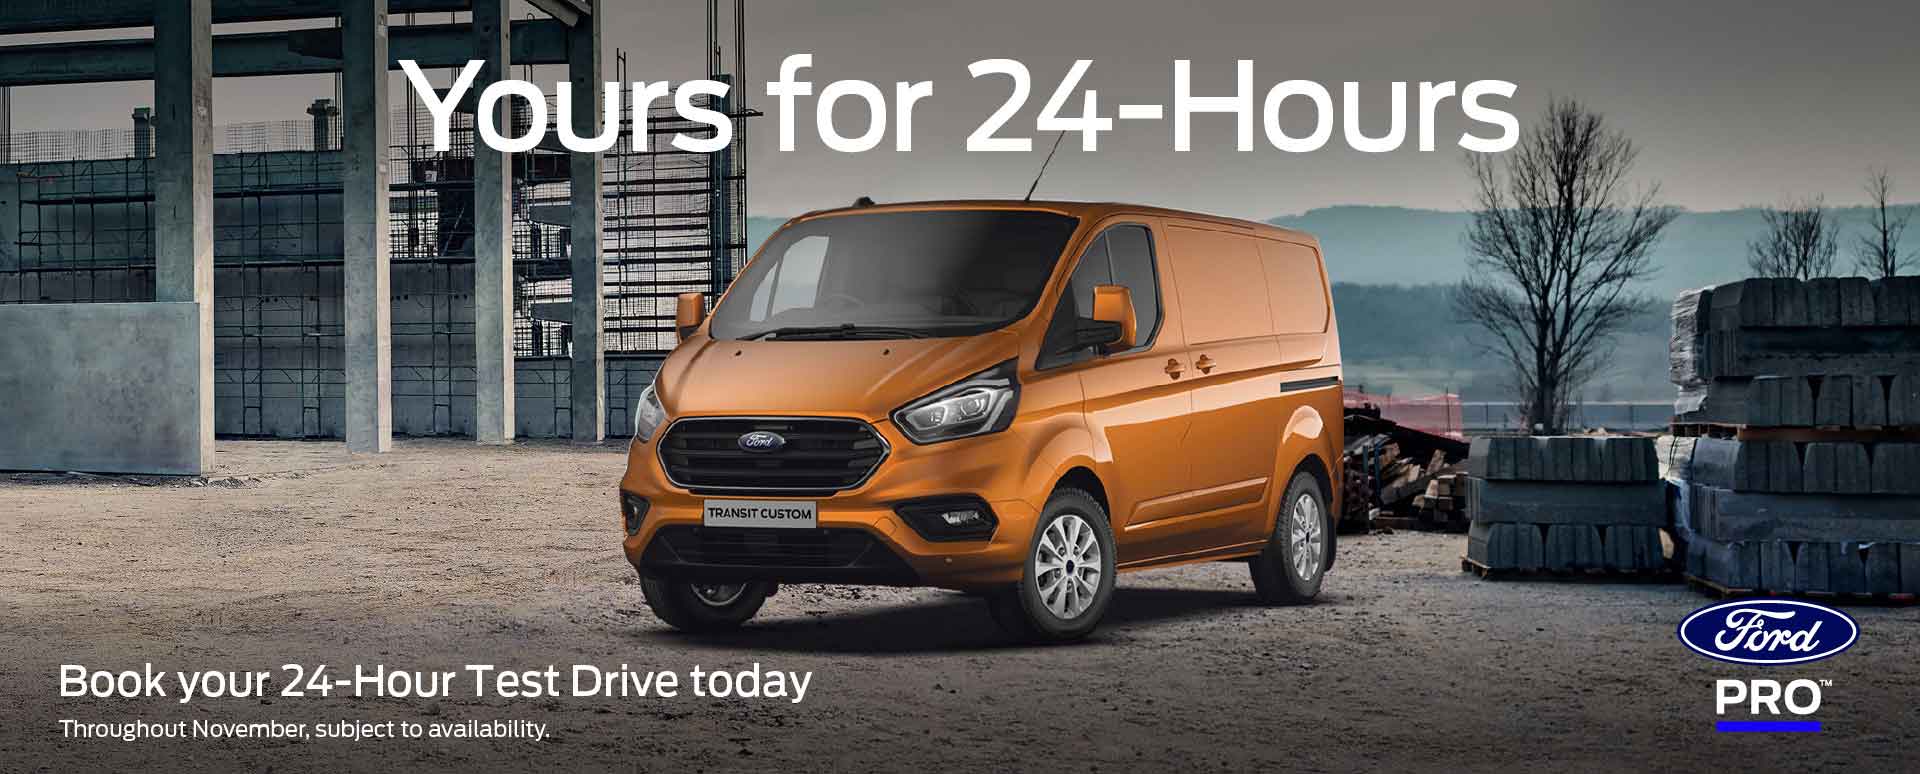 Ford 24 Hour Test Drive Vans